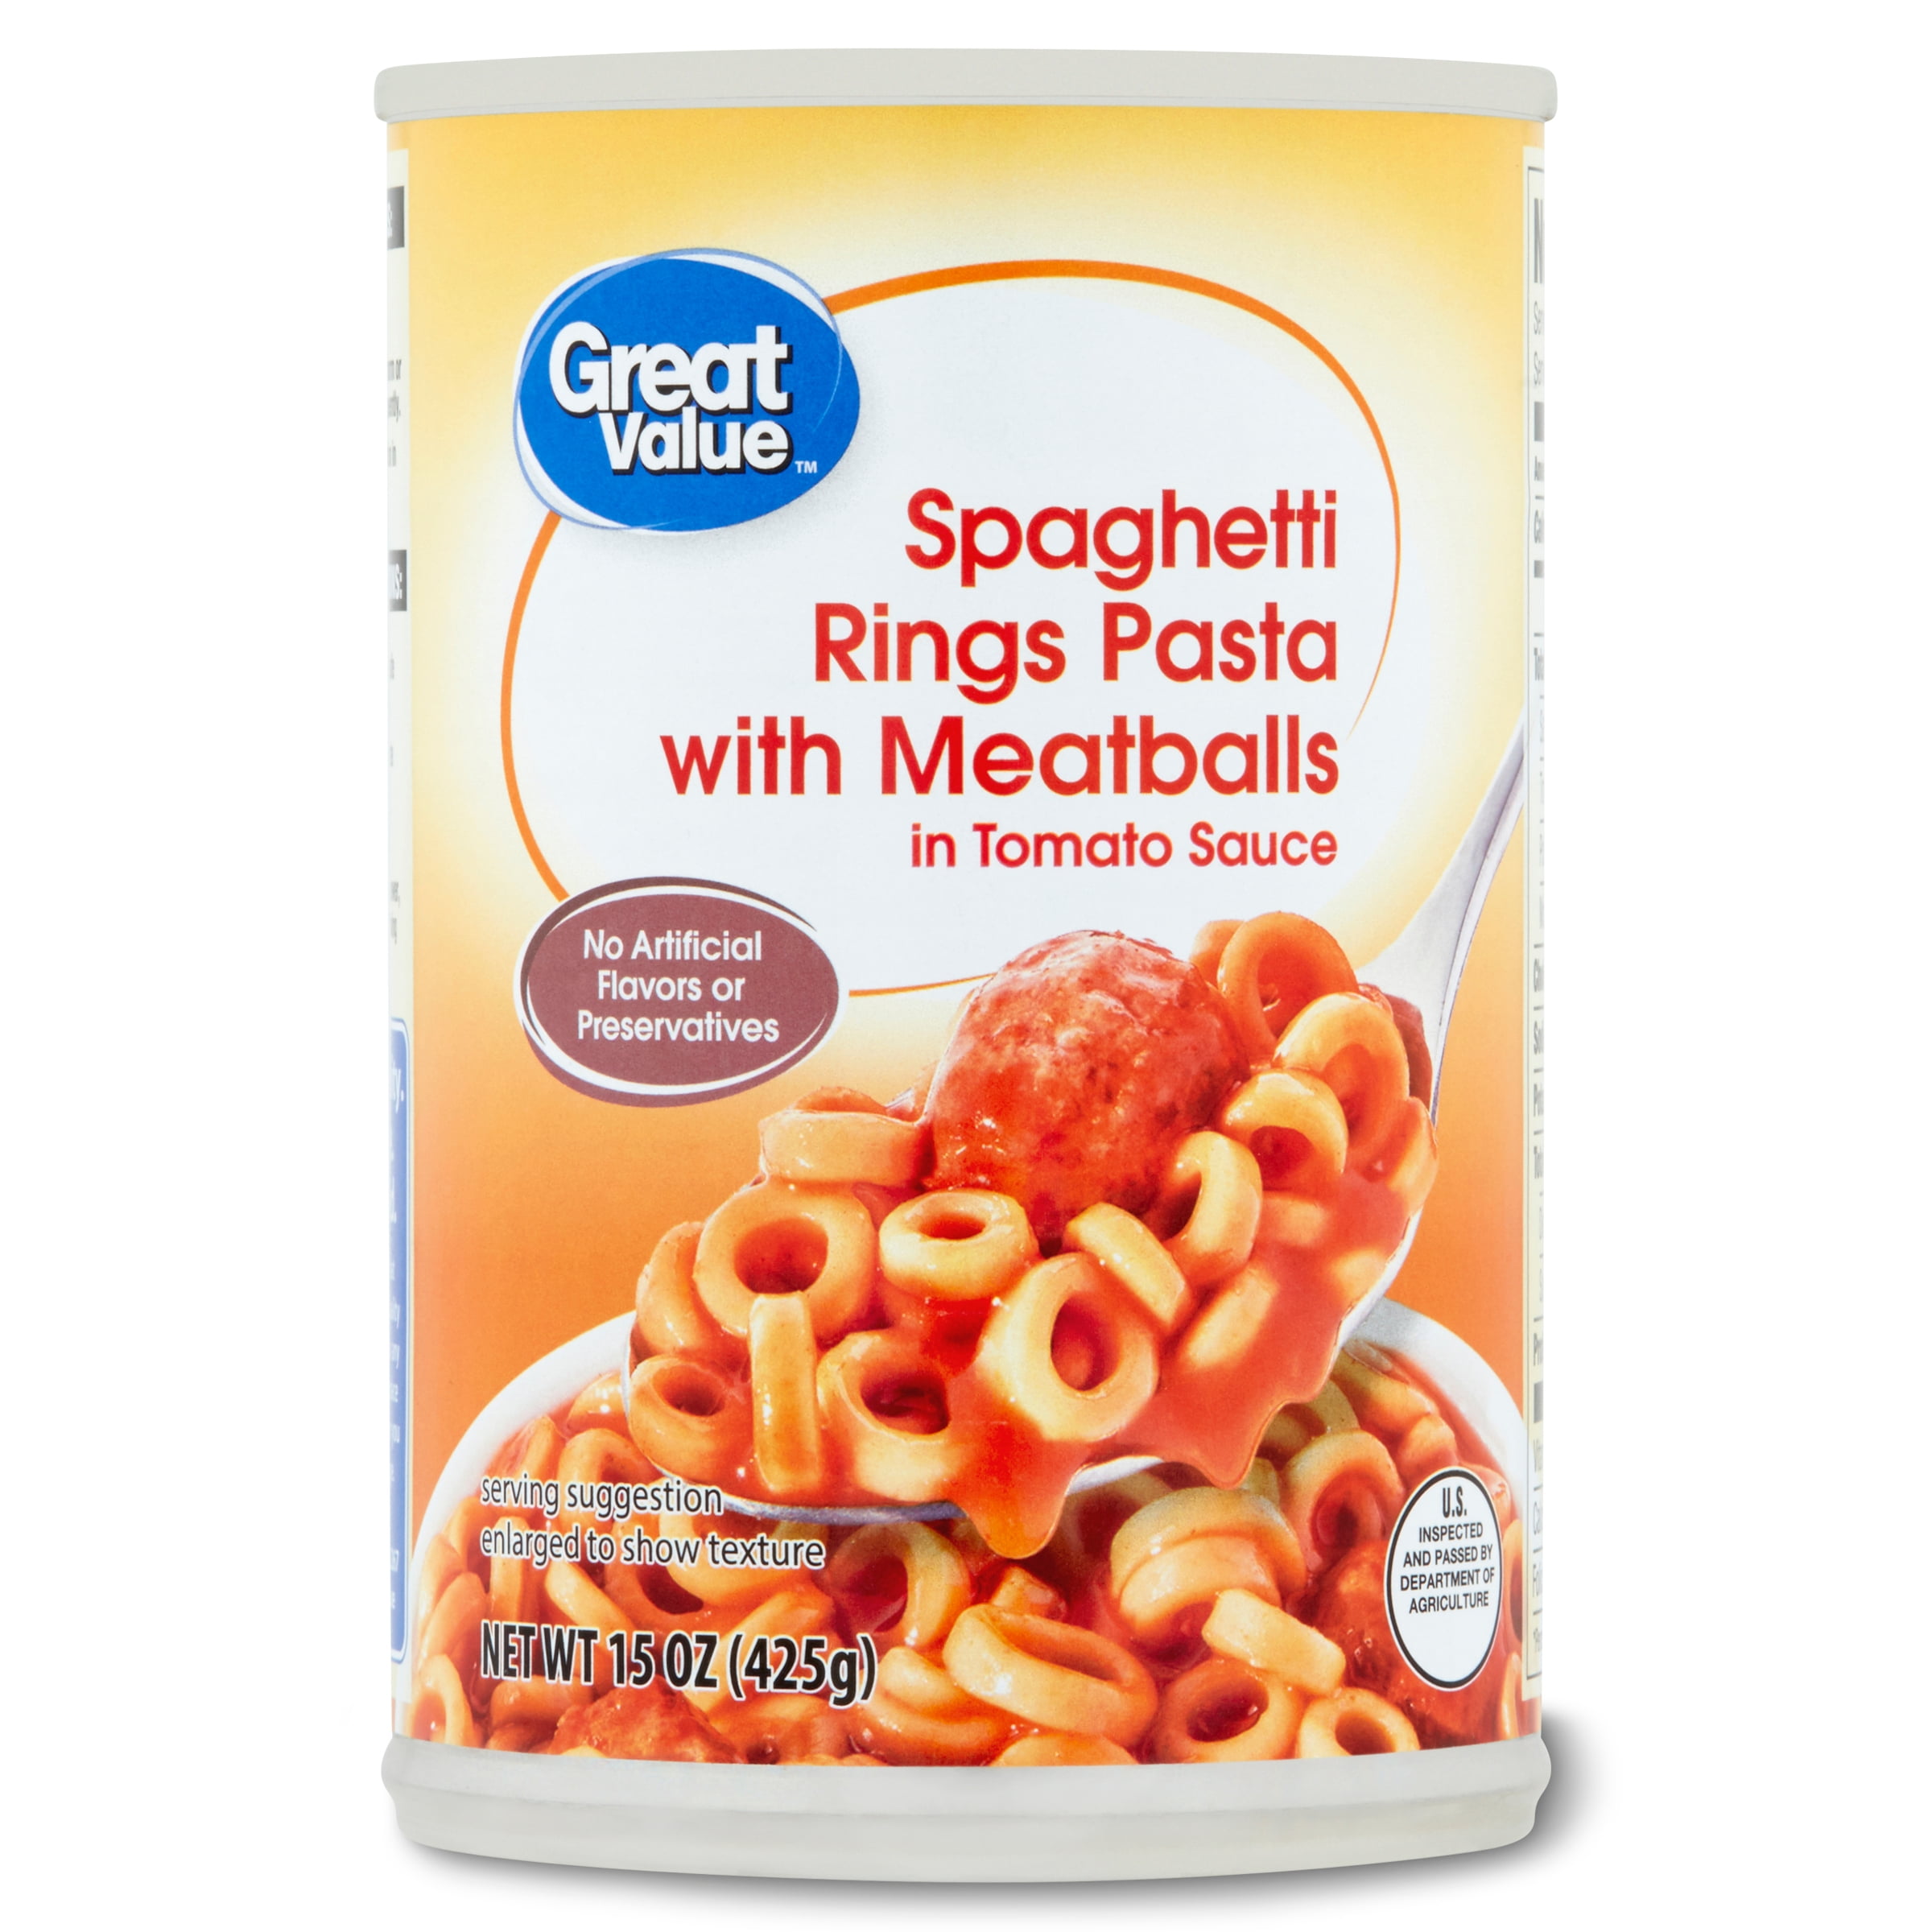 Great Value Spaghetti Rings Pasta with Meatballs in Tomato Sauce, 15 oz